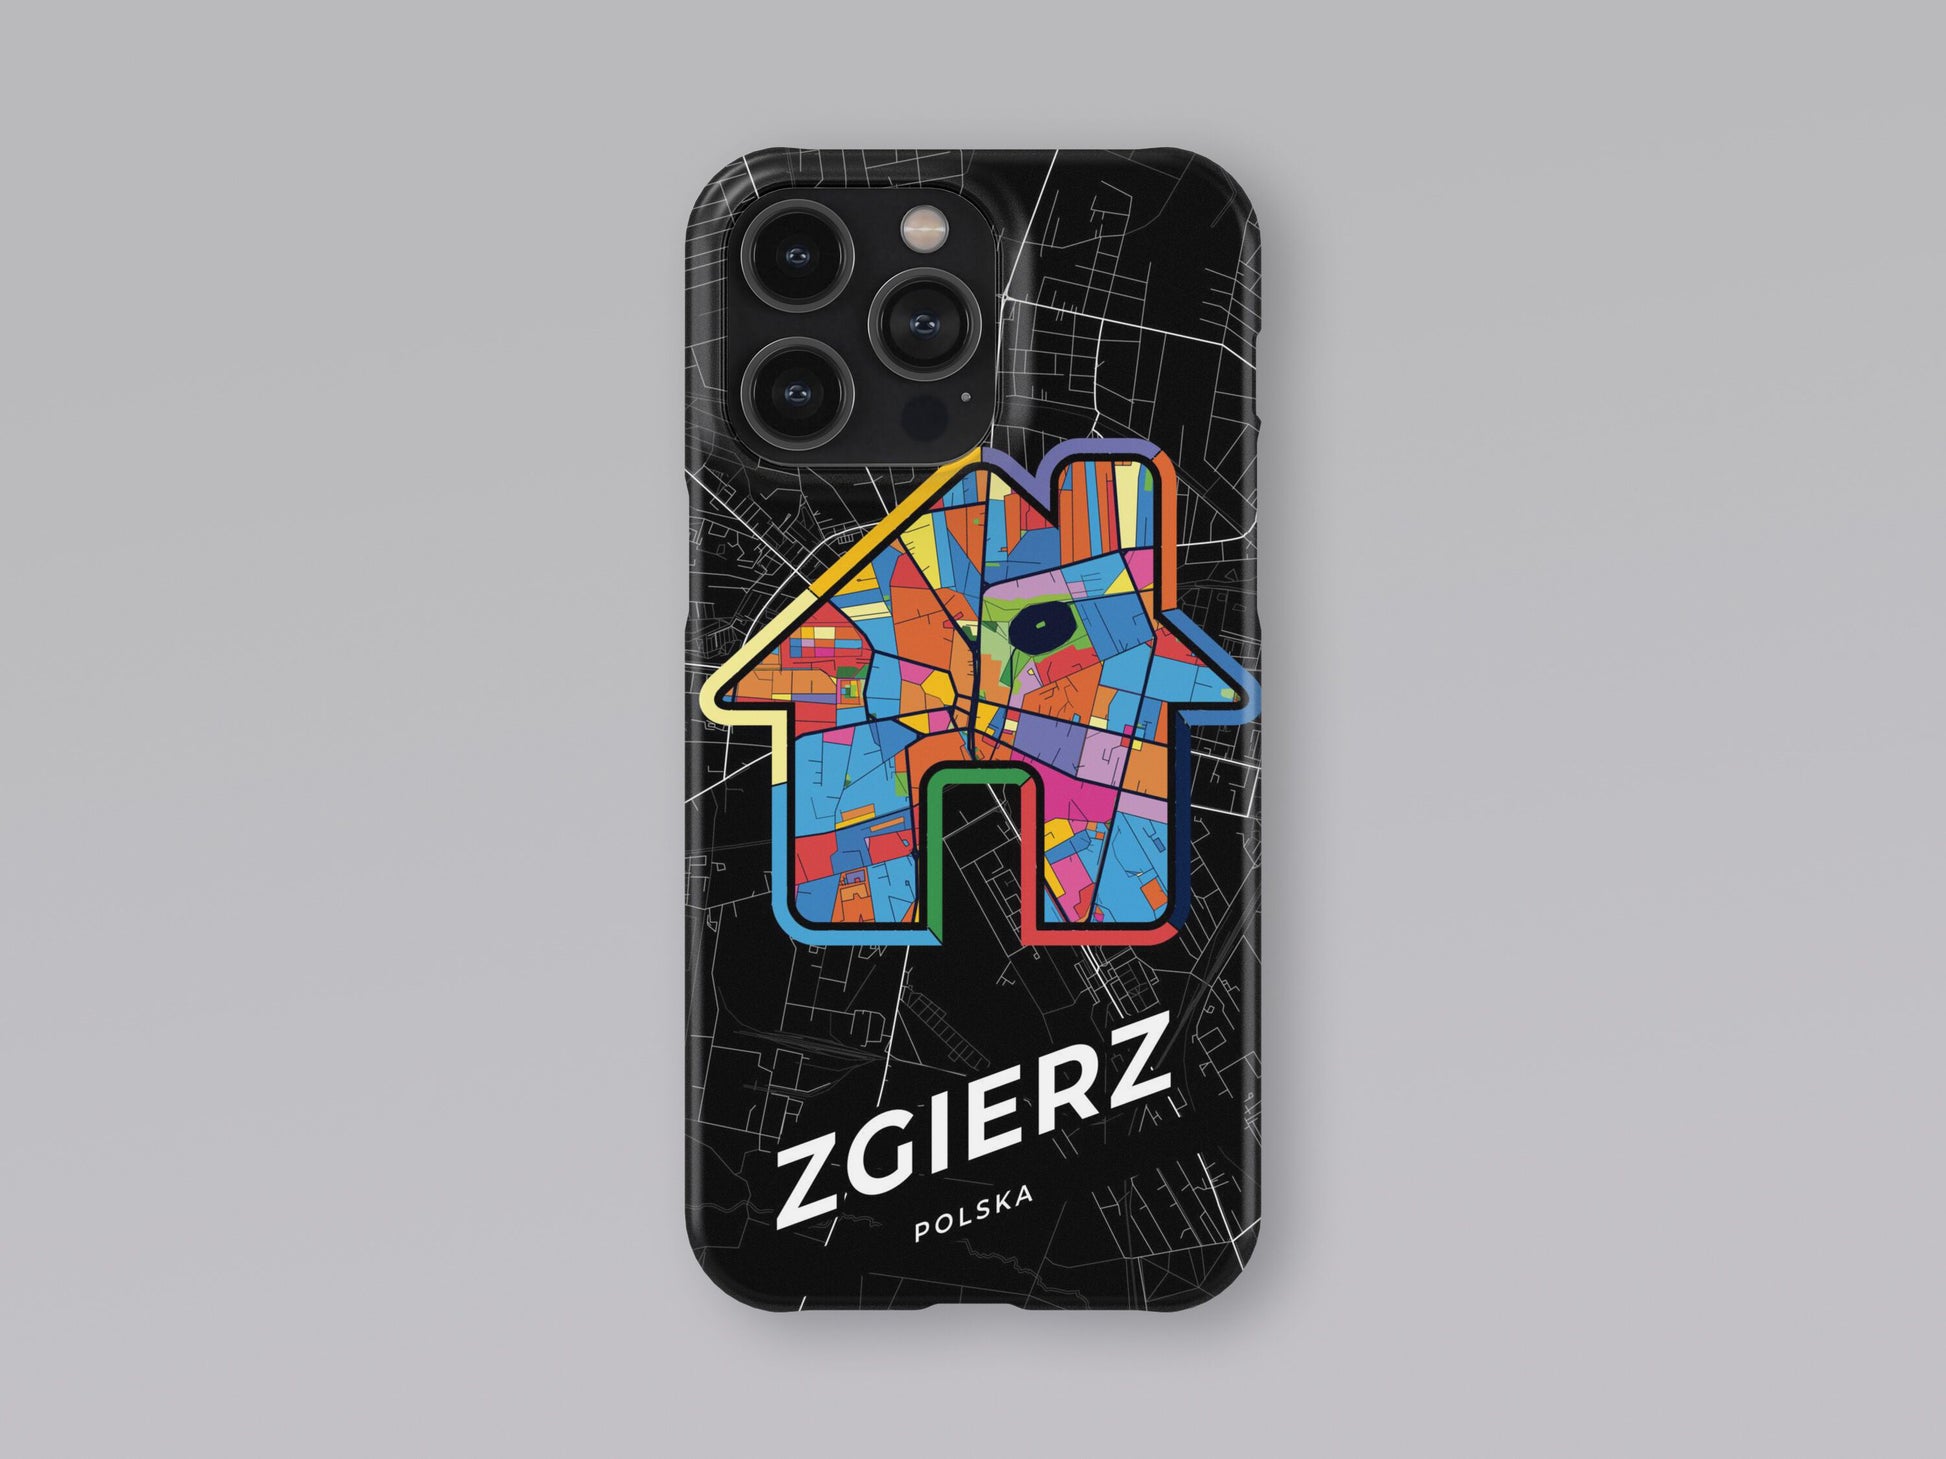 Zgierz Poland slim phone case with colorful icon 3